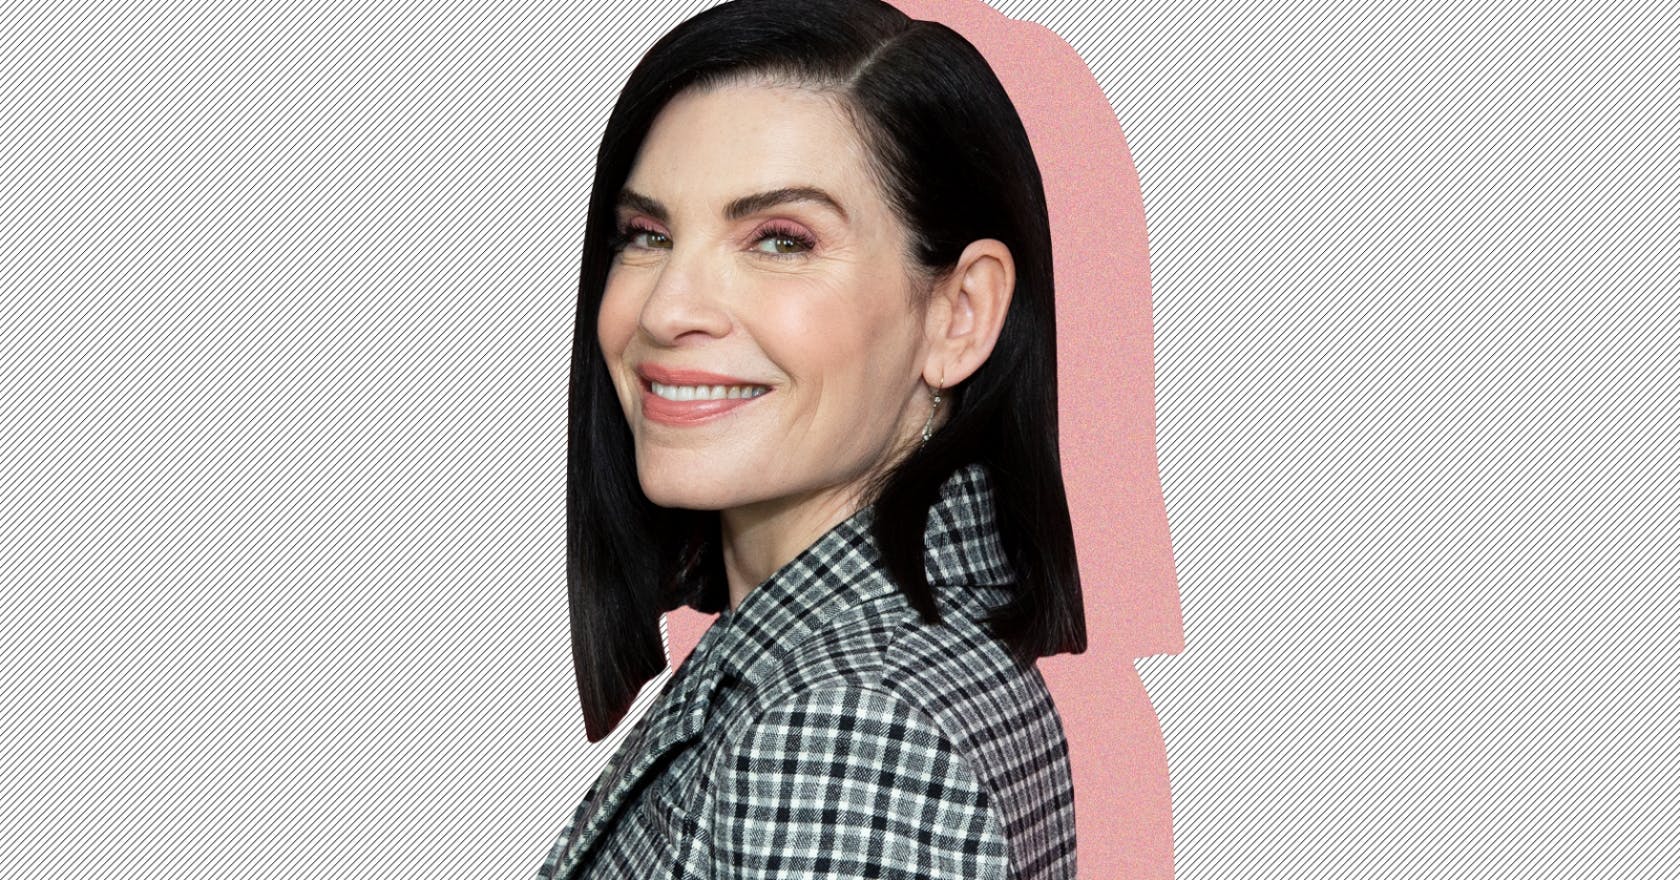 The real reason Julianna Margulies isn’t on The Good Fight? 